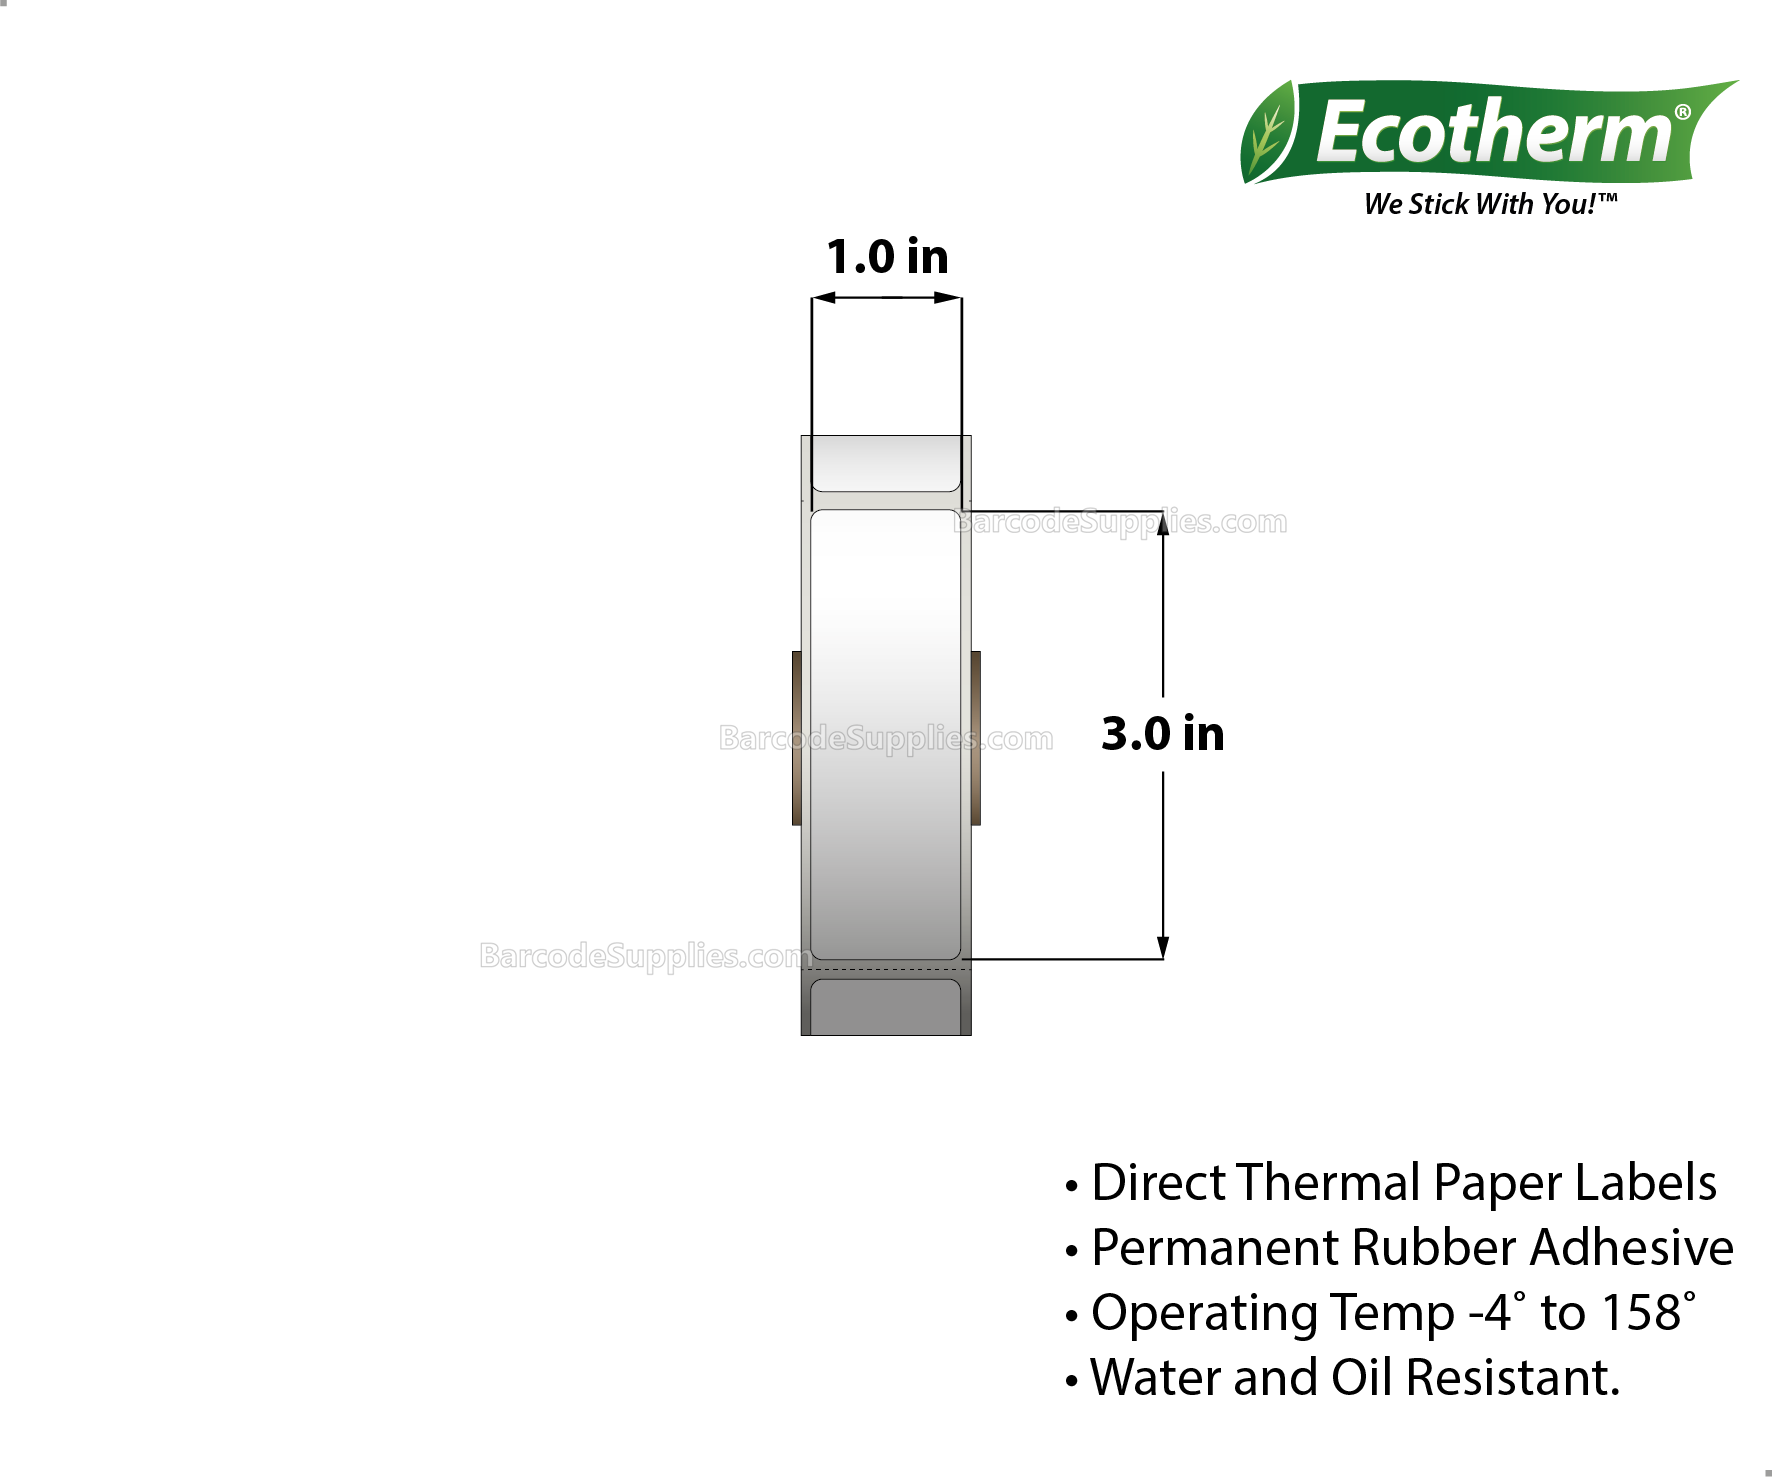 1 x 3 Direct Thermal White Labels With Rubber Adhesive - Perforated - 680 Labels Per Roll - Carton Of 4 Rolls - 2720 Labels Total - MPN: ECOTHERM14130-4